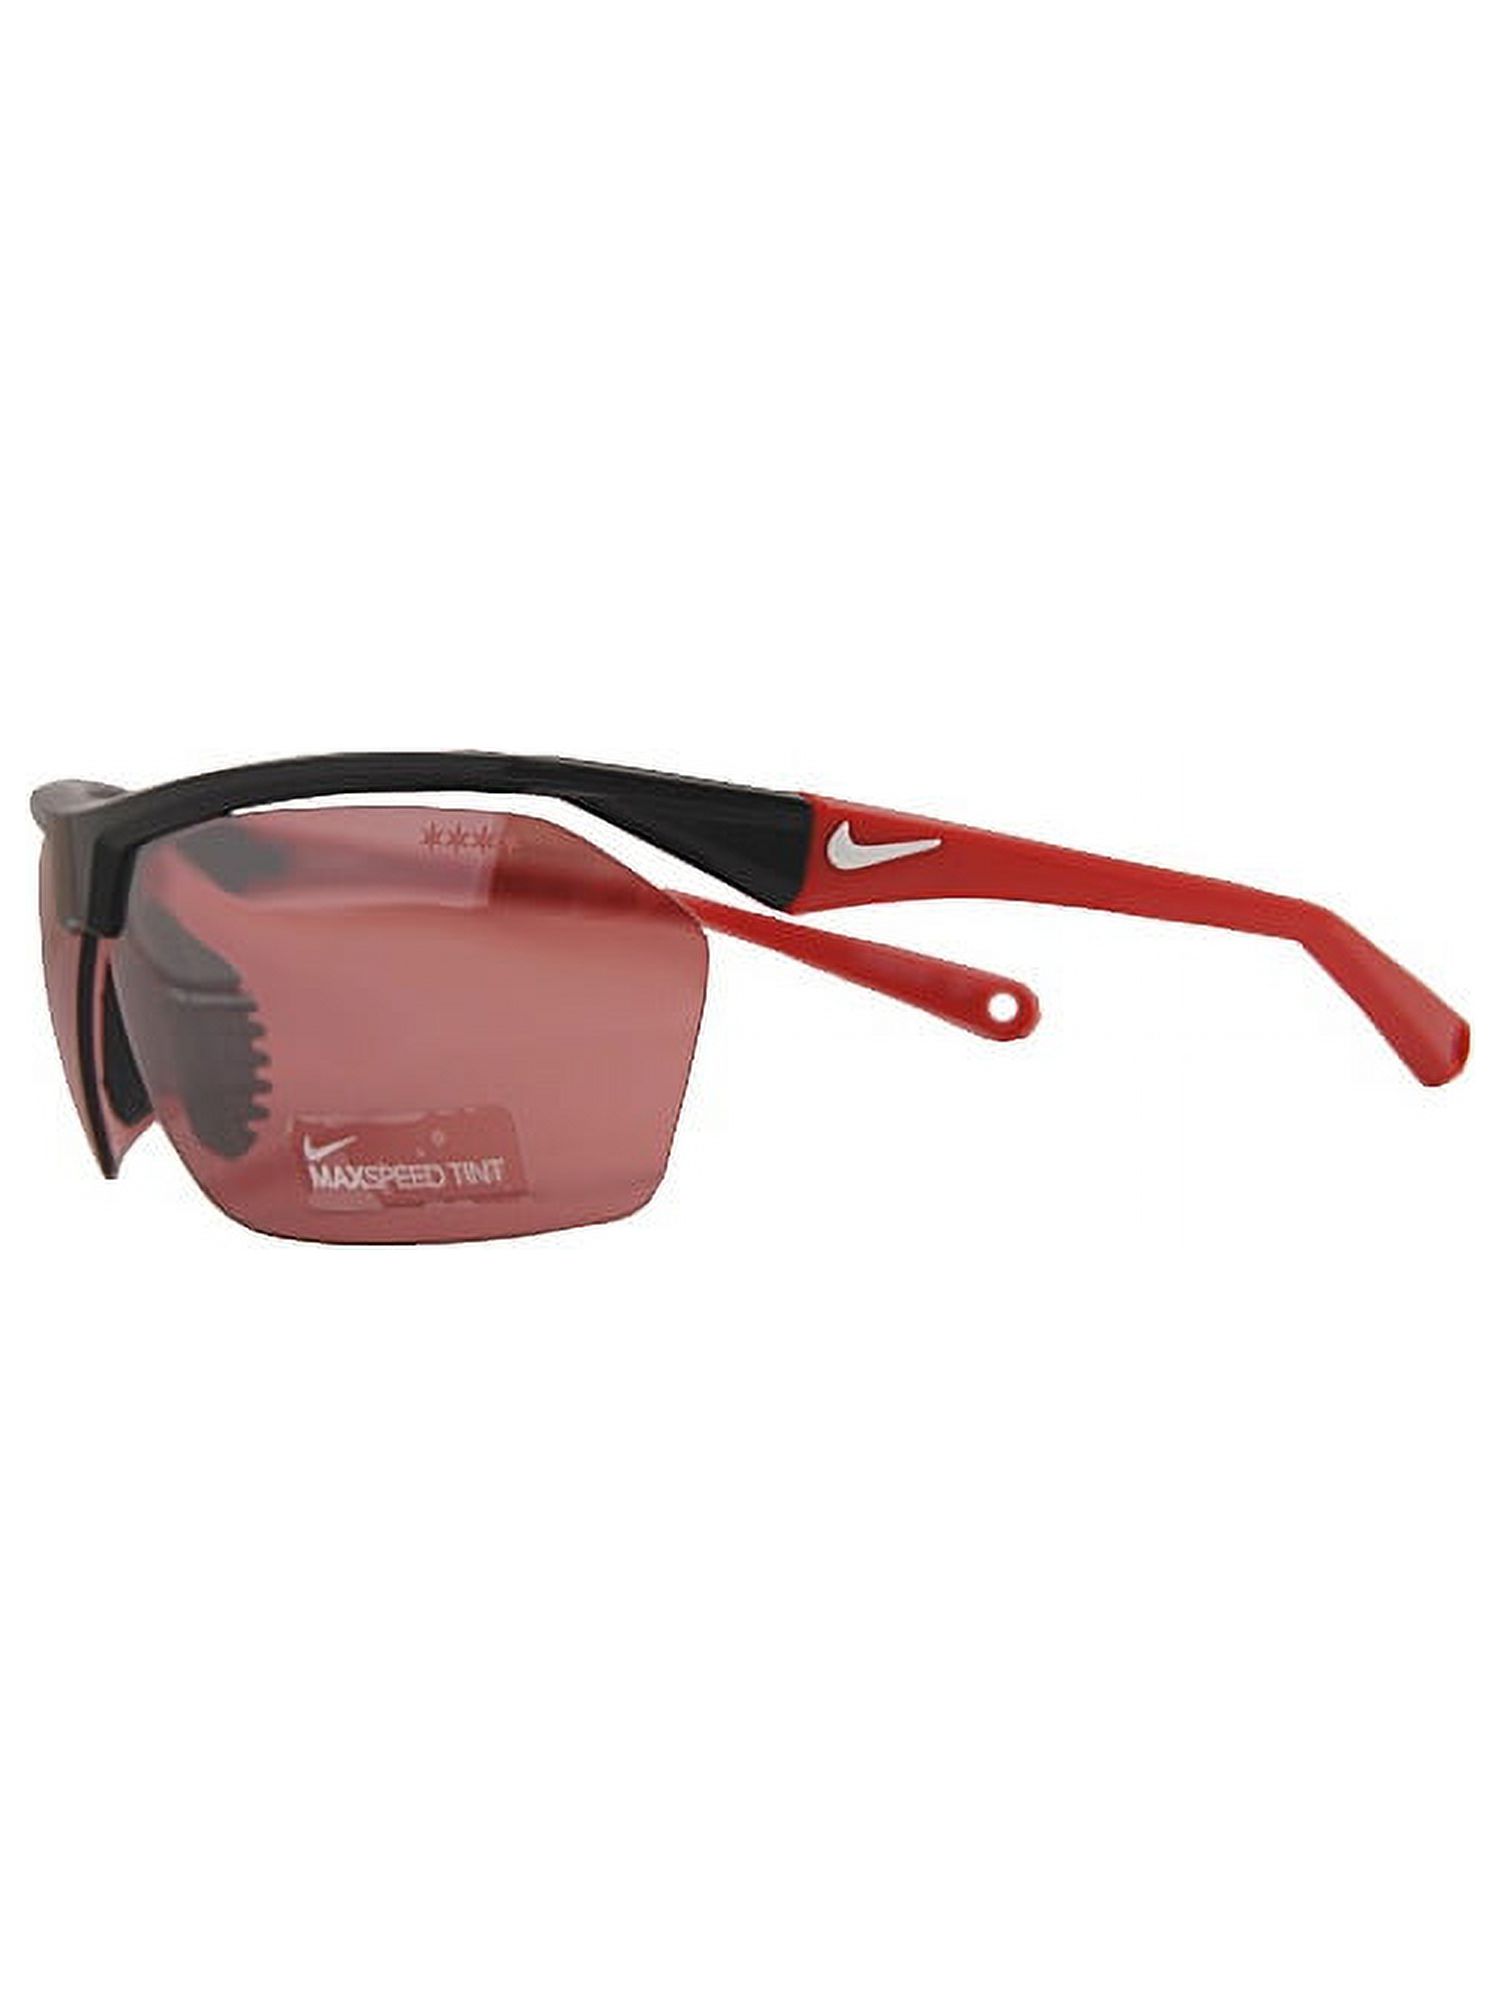 Tailwind 12E EV0656 062 Black/Red Frame, Max Speed Tint Lens Sunglasses - image 1 of 2